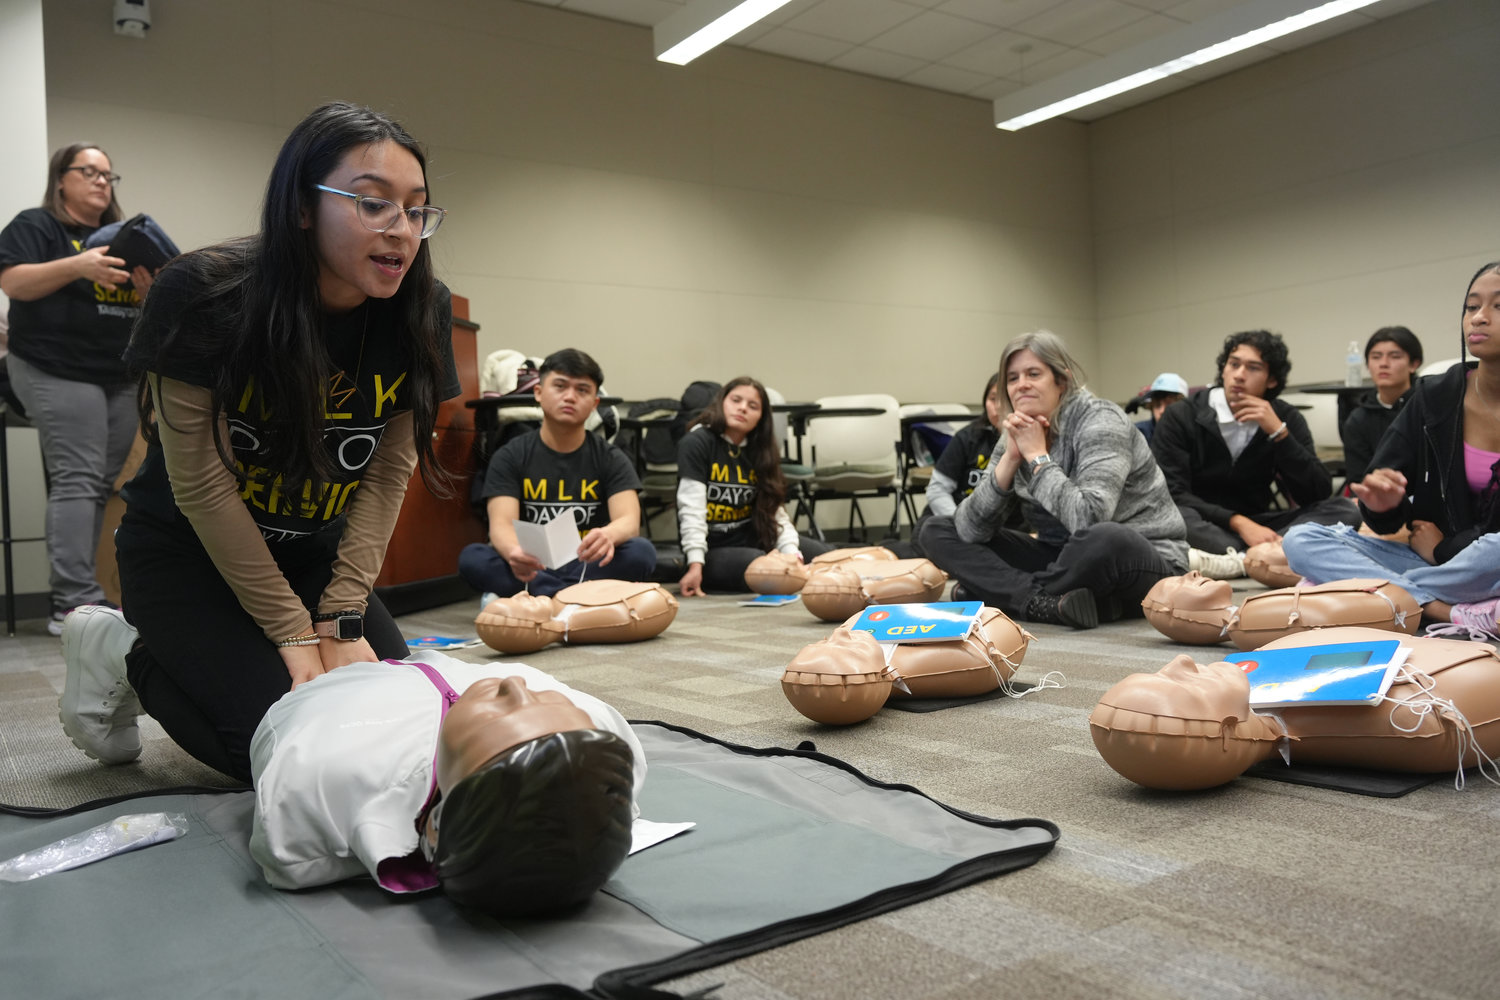 Nursing student Melissa Jaco instructs the class on how to correctly perform CPR, during the MLK Day of Service event at Molloy University.